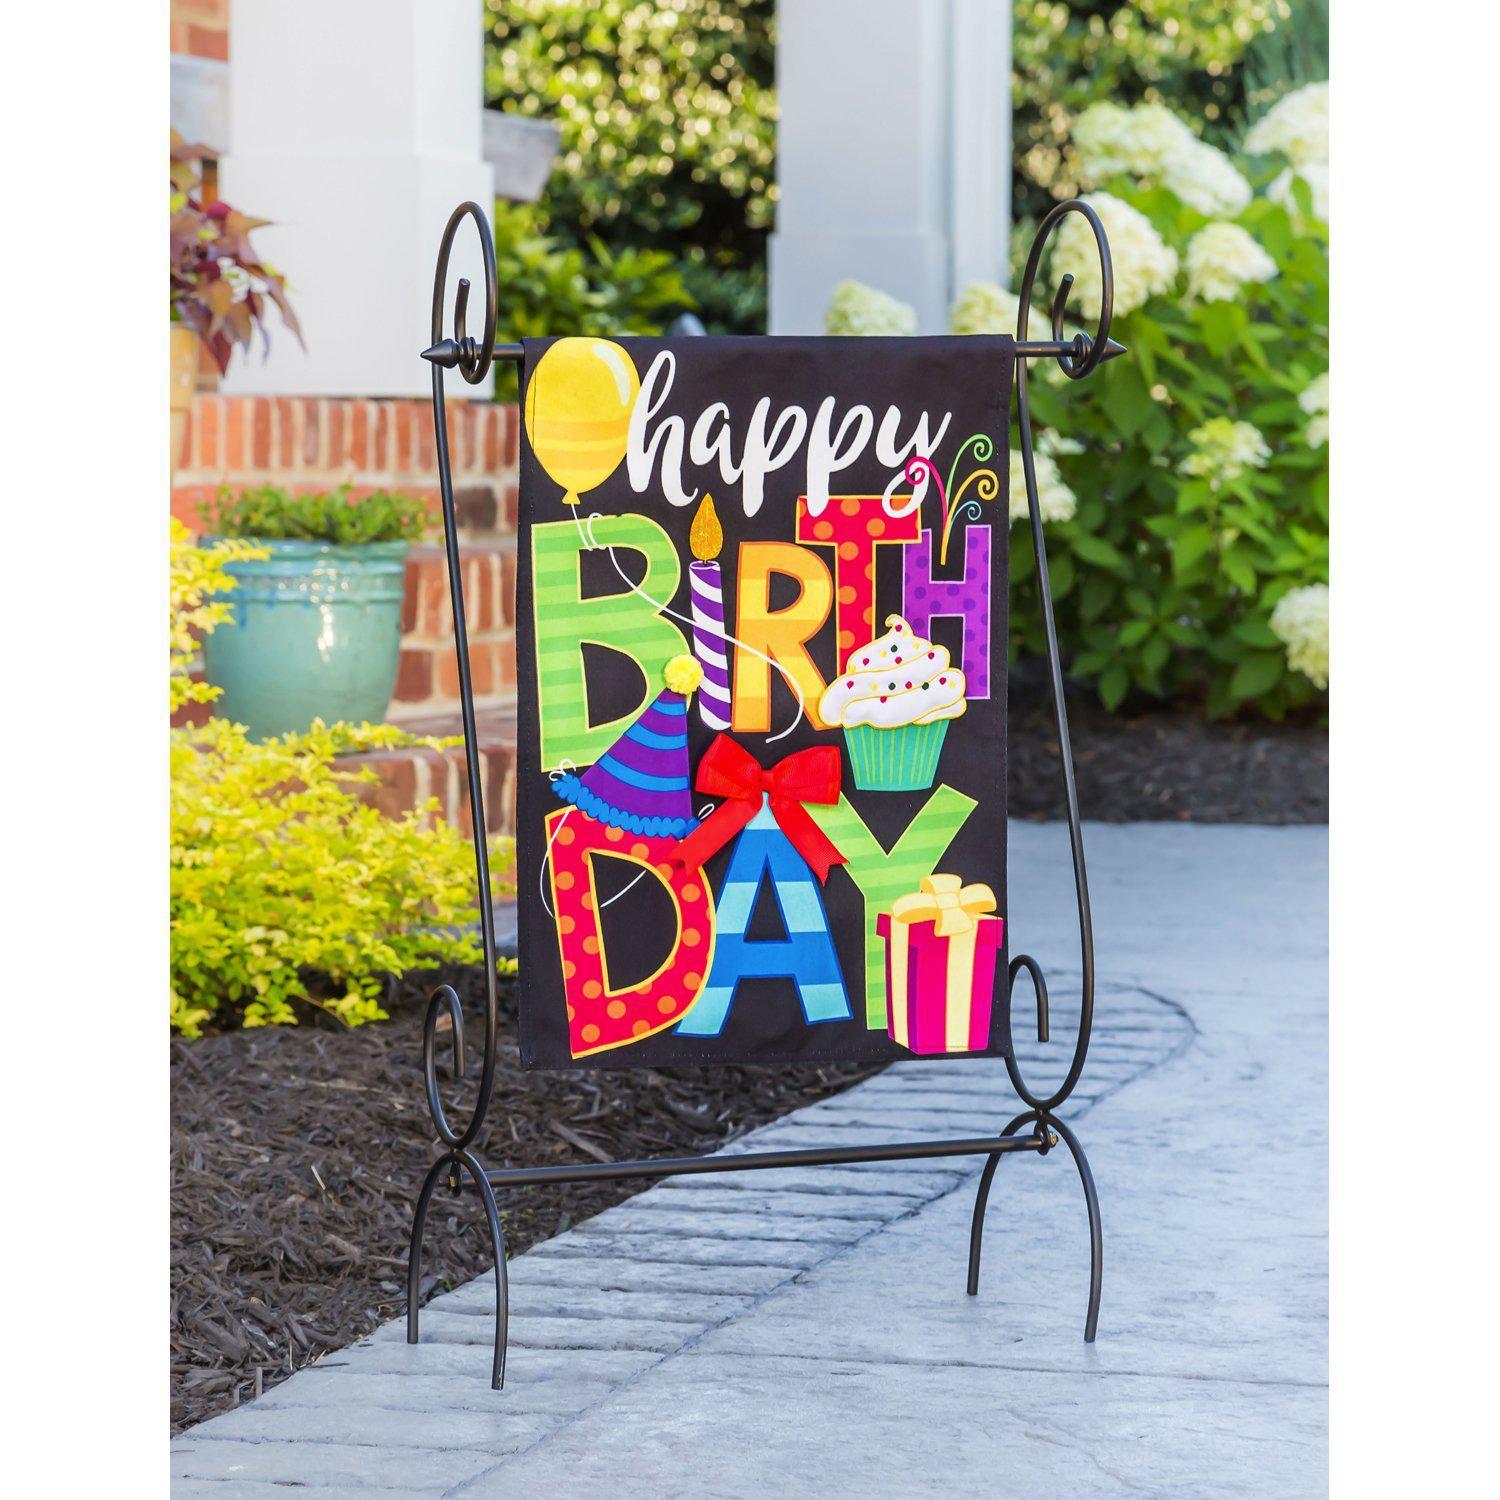 The two-sided Happy Birthday garden flag features a balloon, cupcake, candle, bow, presents, and the words "Happy Birthday"!